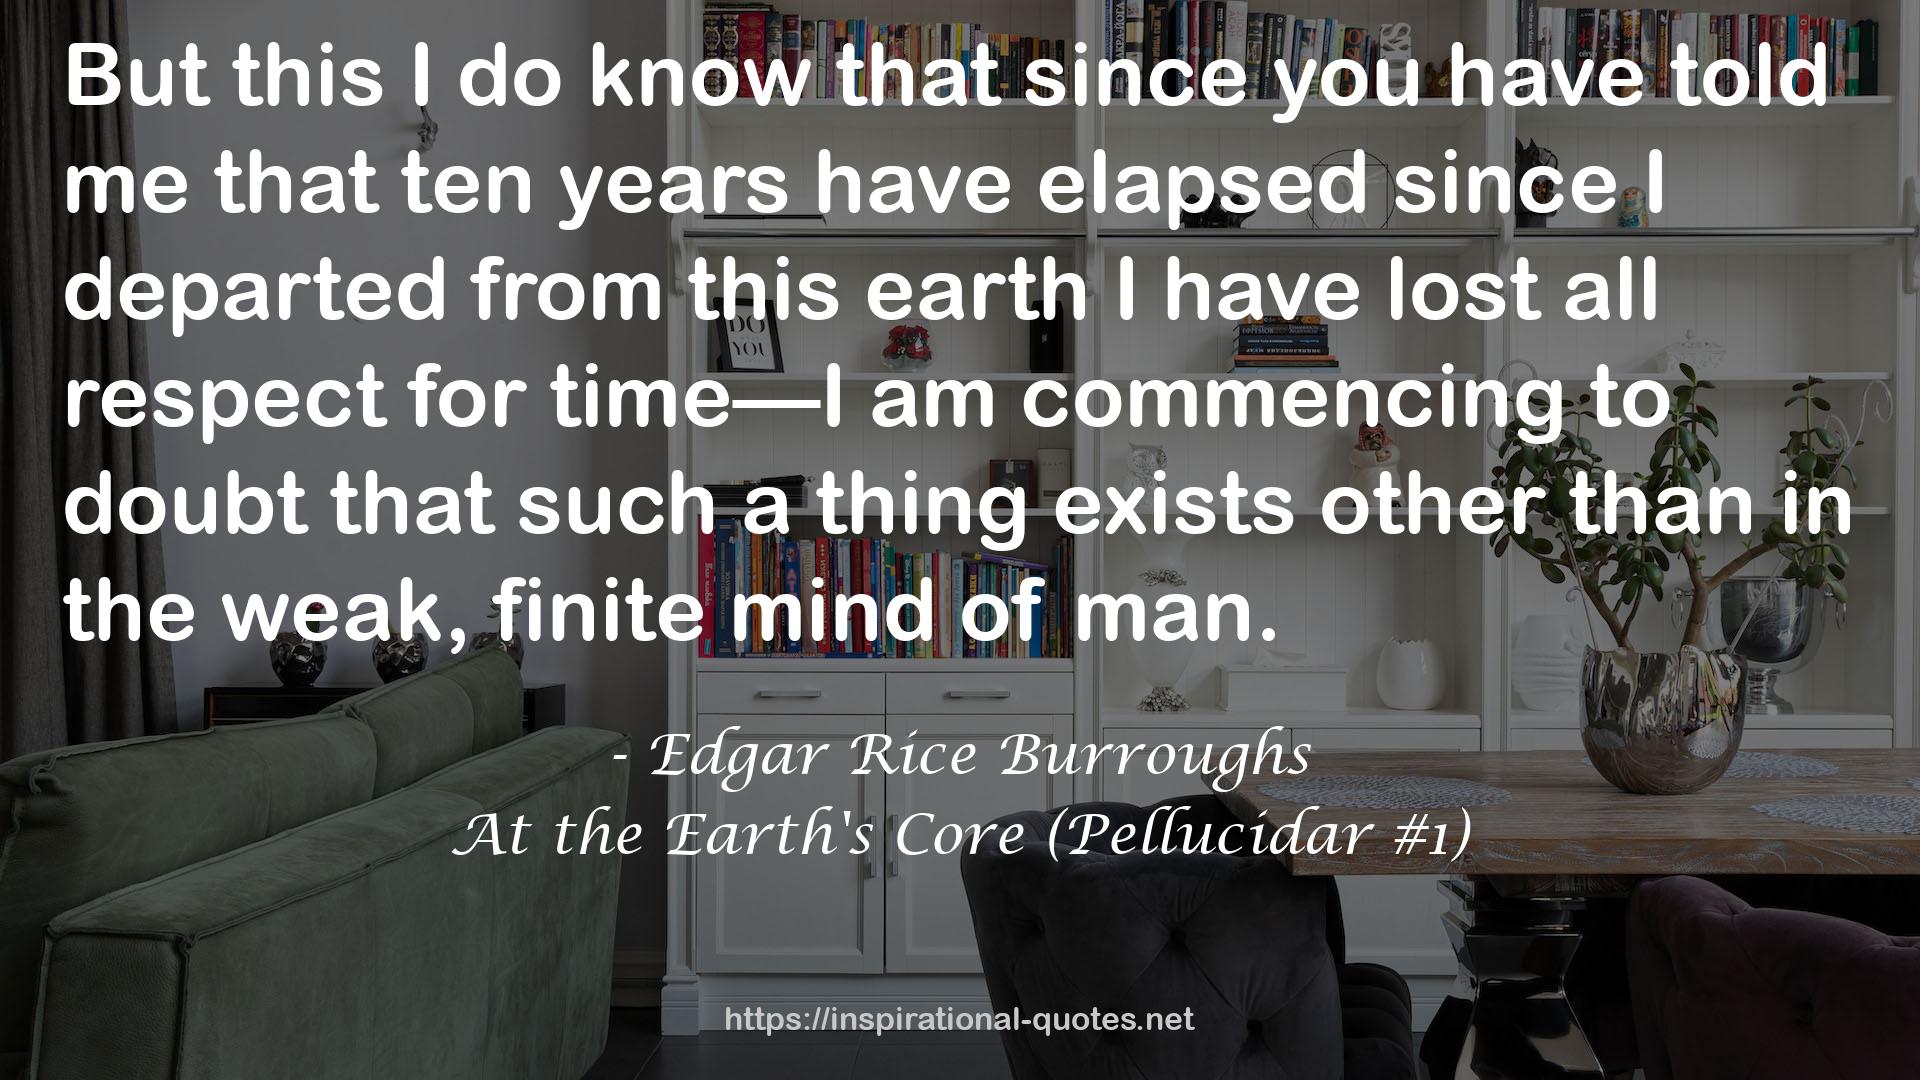 At the Earth's Core (Pellucidar #1) QUOTES